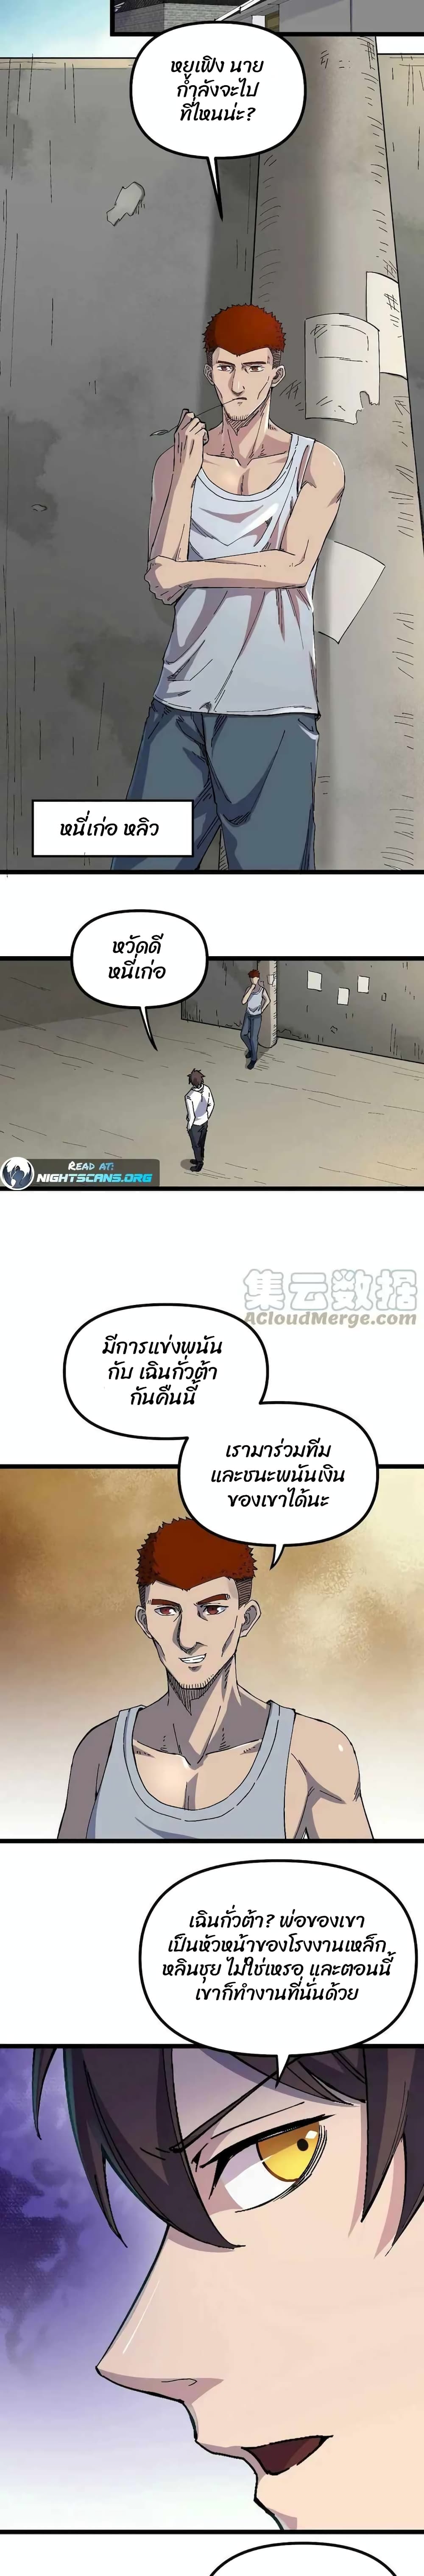 Rebirth Back to 1983 to Be a Millionaire ตอนที่ 3 (8)